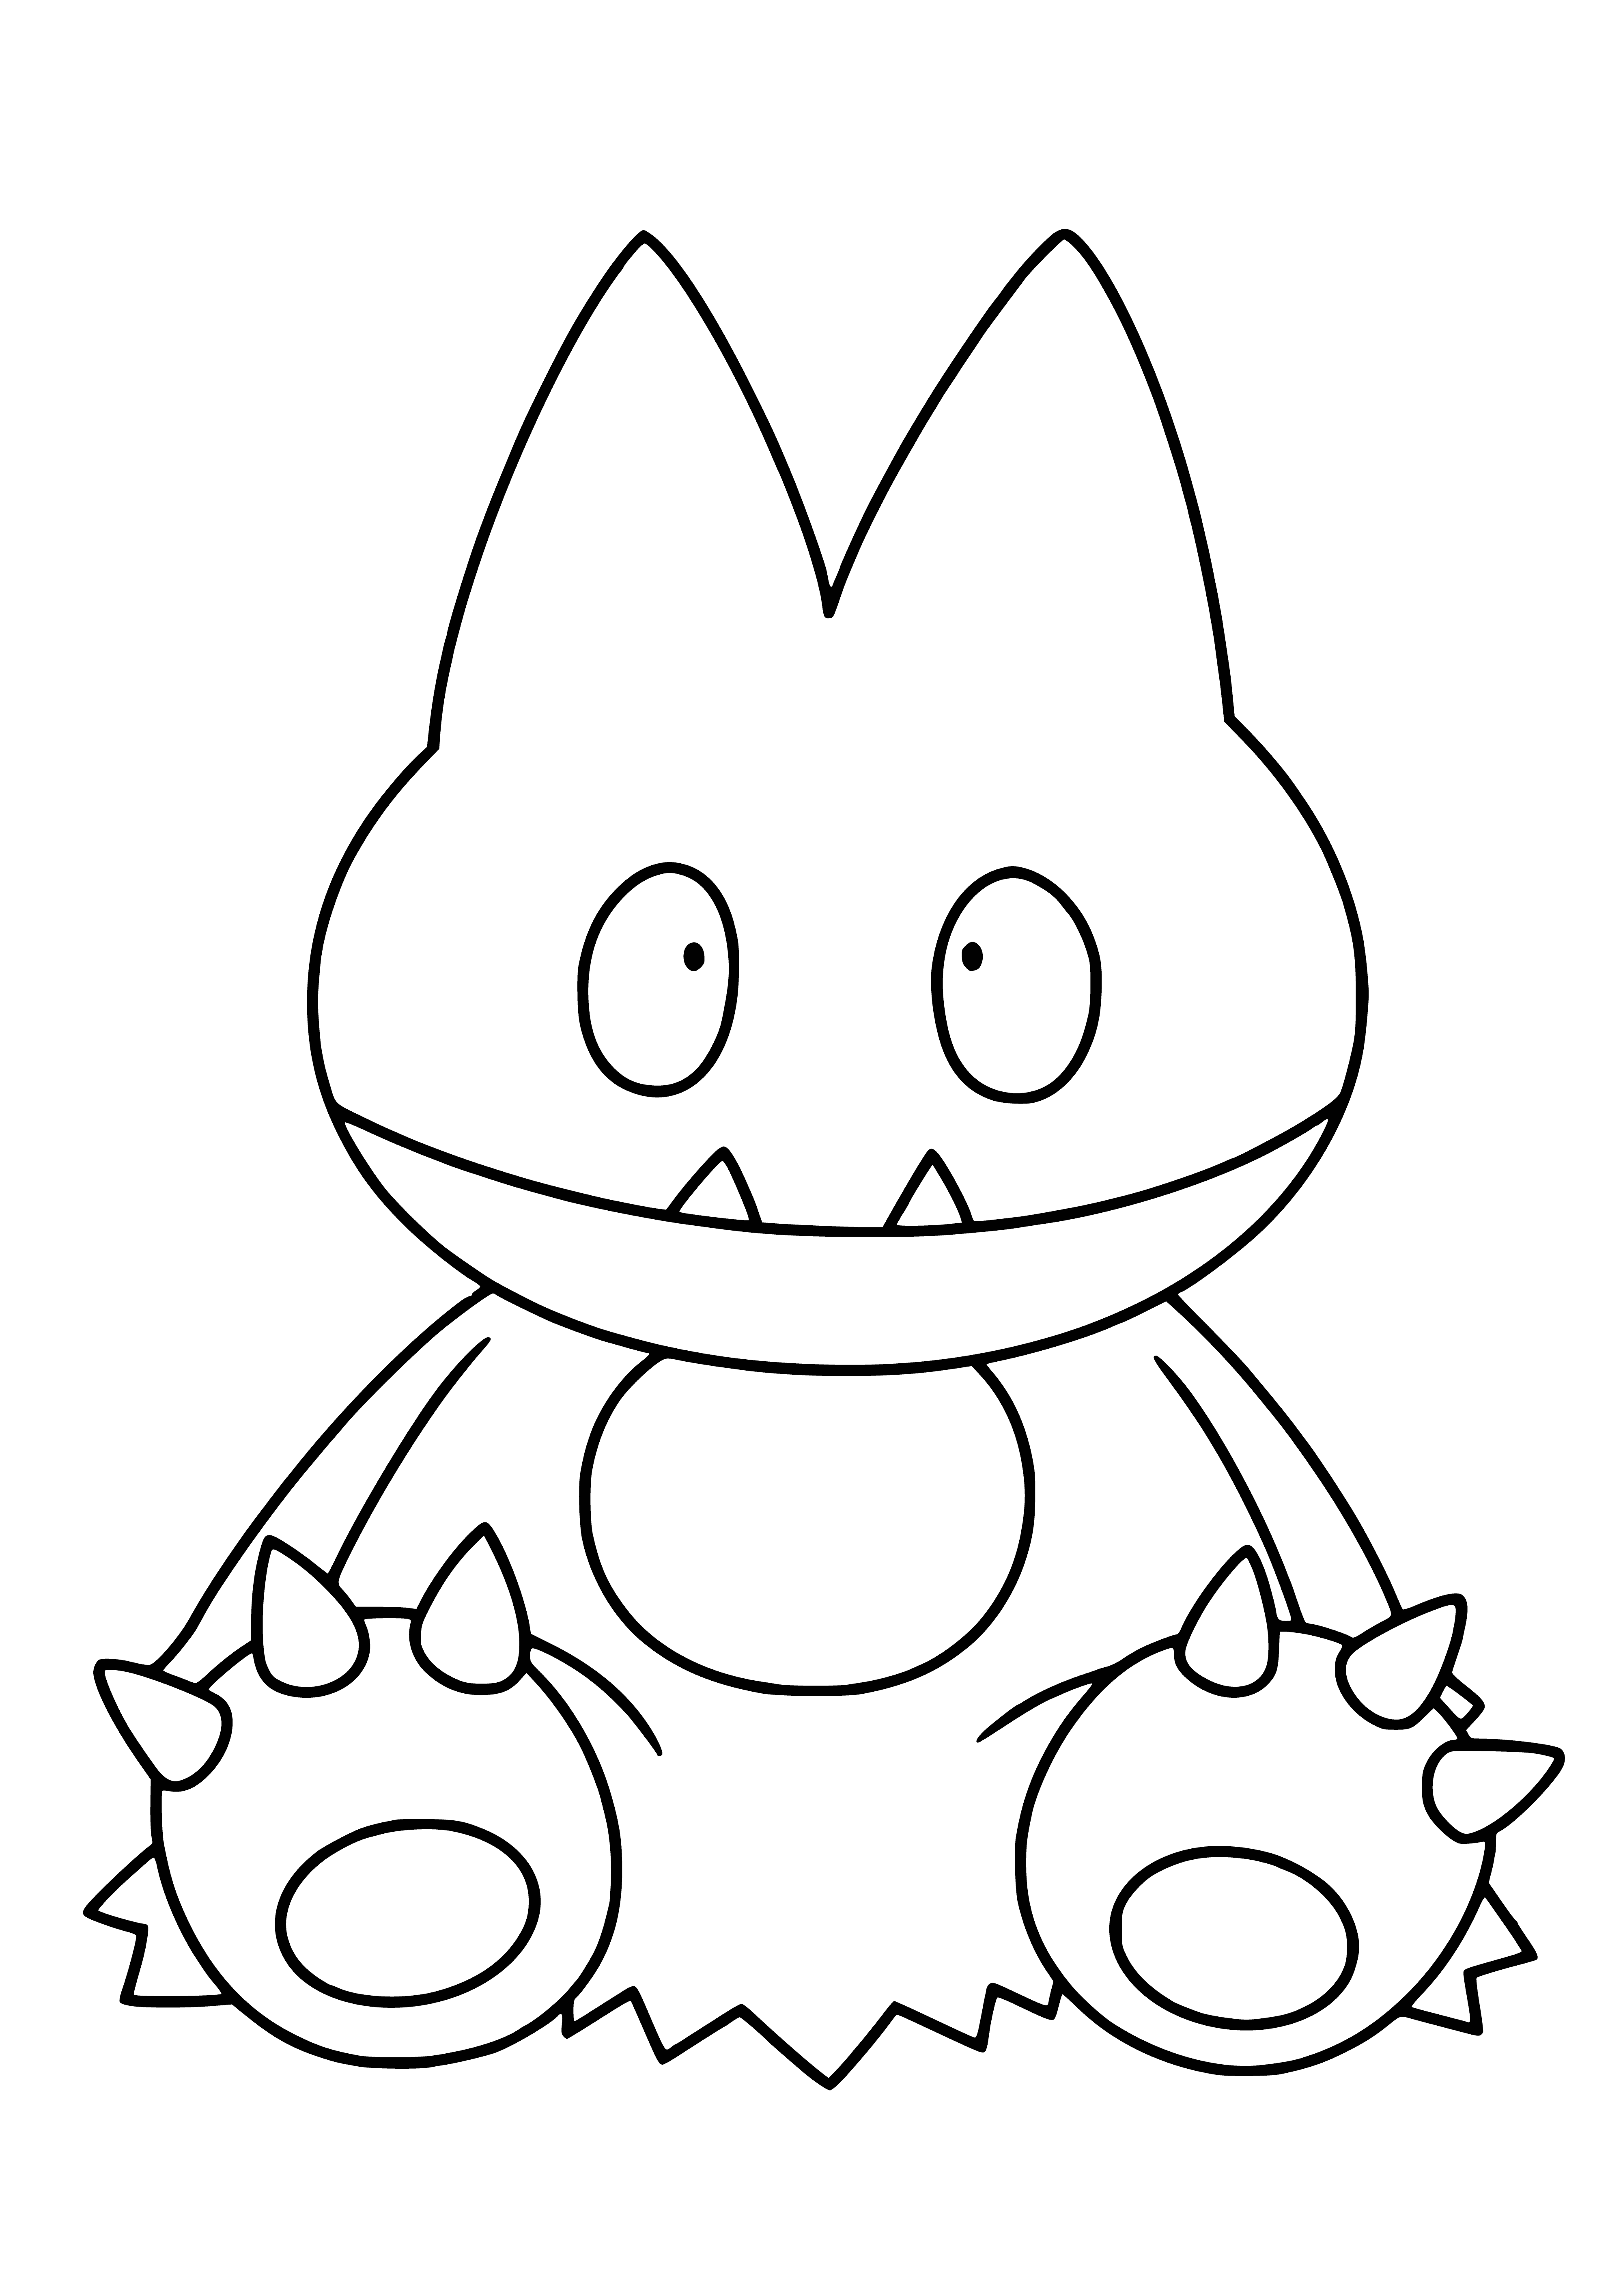 coloring page: Munchlax is a small, tubby Pokemon, blue in color with white stomach, brown stripe and small, triangular ears. Big, round eyes and brown tail.